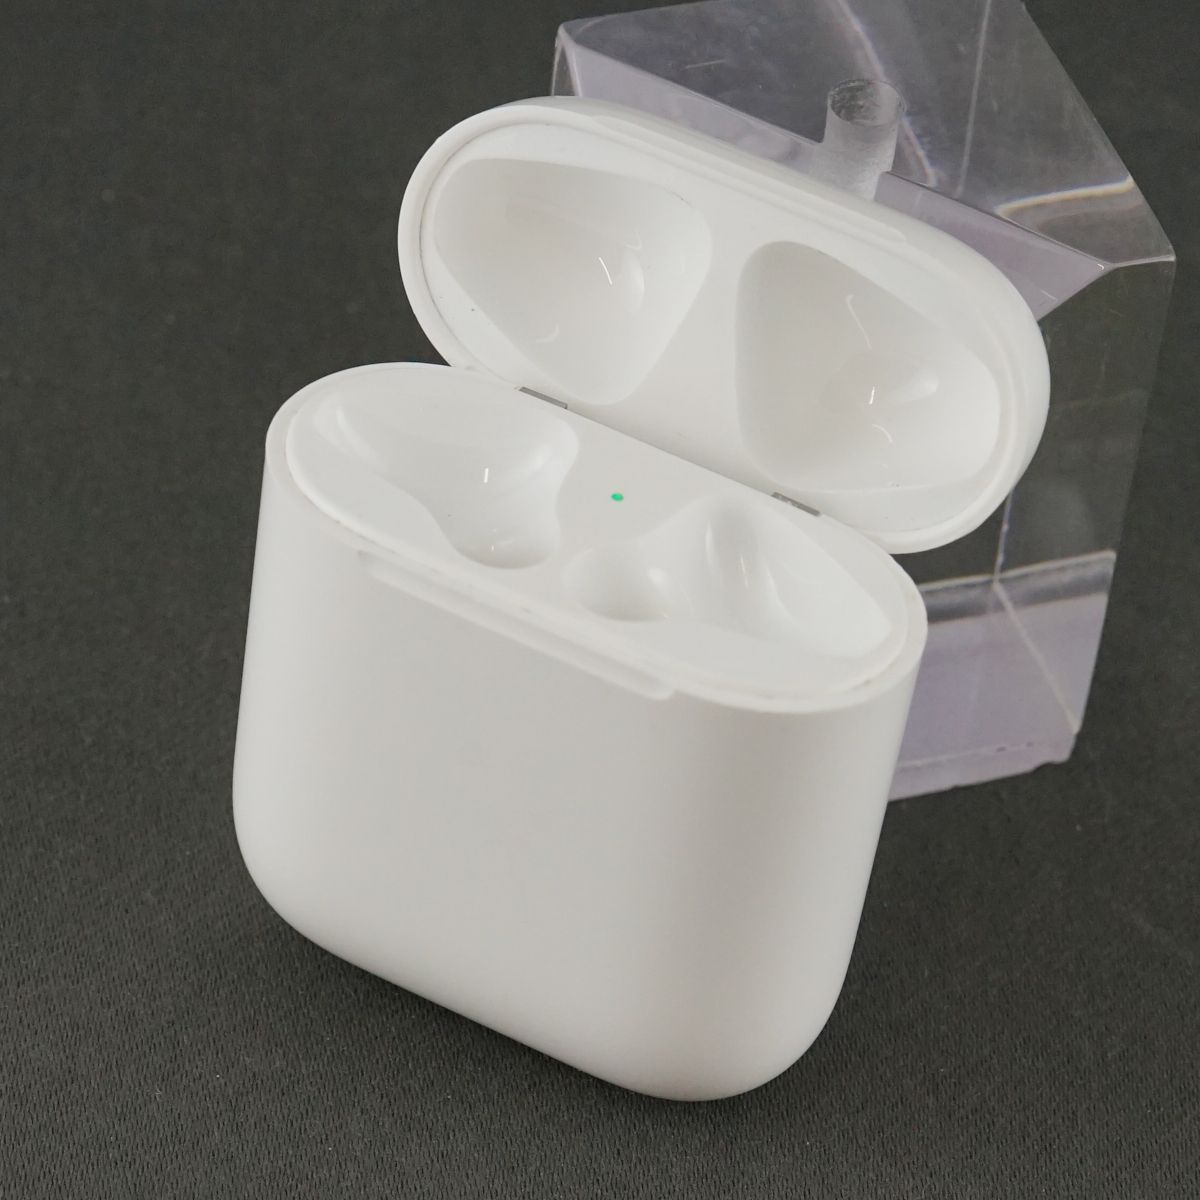 Apple AirPods with Charging Case エアーポッズ 充電ケースのみ 第二 ...